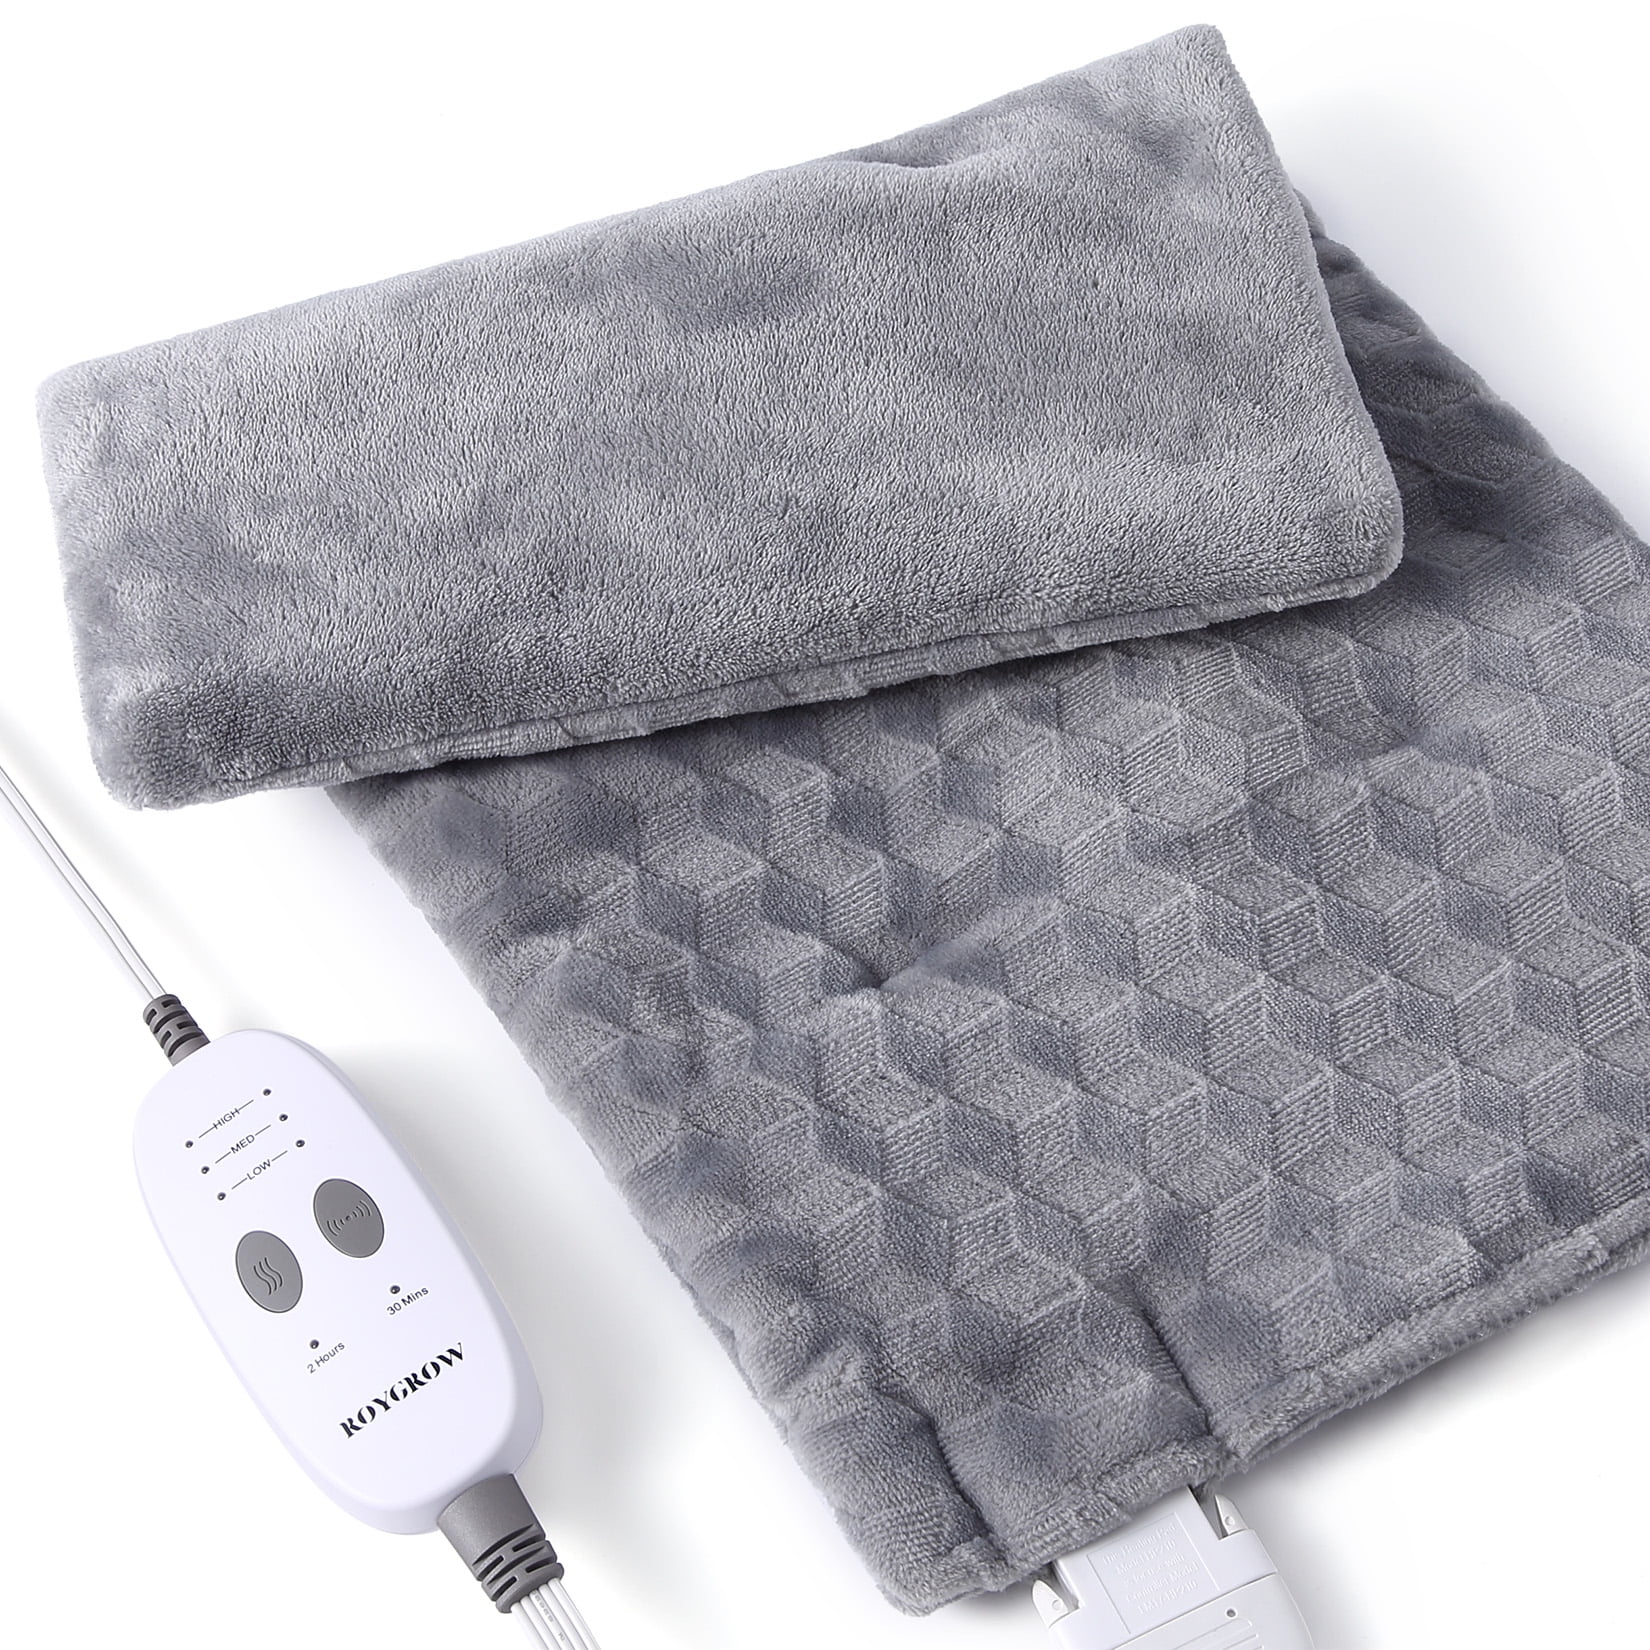 220V Electric Heating Pad Portable Electric Blanket Heated Blanket Warming  Pain Relief Pad Small Electric Heating Blanket